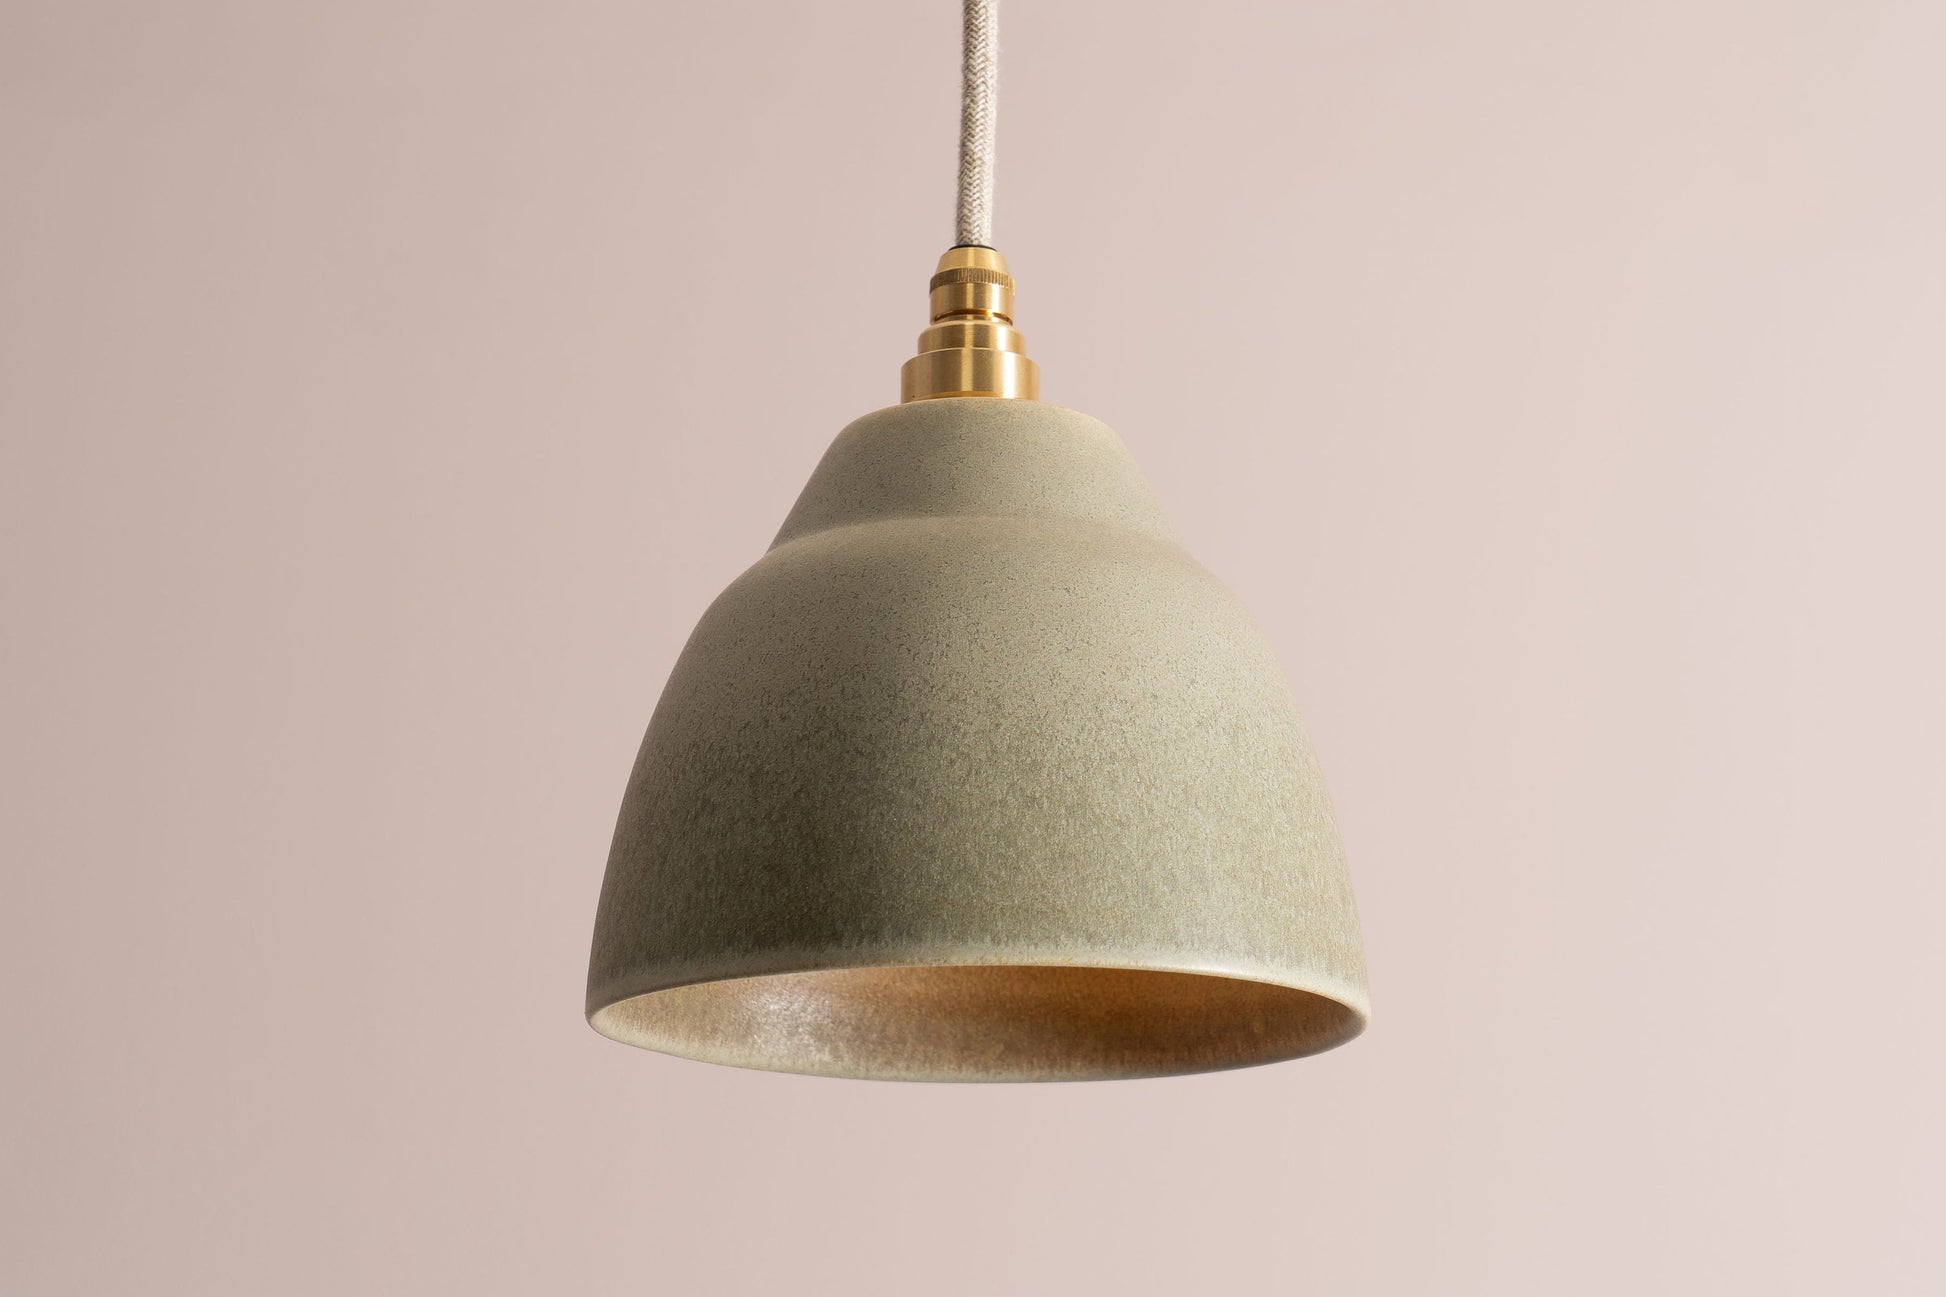 Small Green Element Pendant Light in Ceramic and Brass/Nickel by StudioHaran